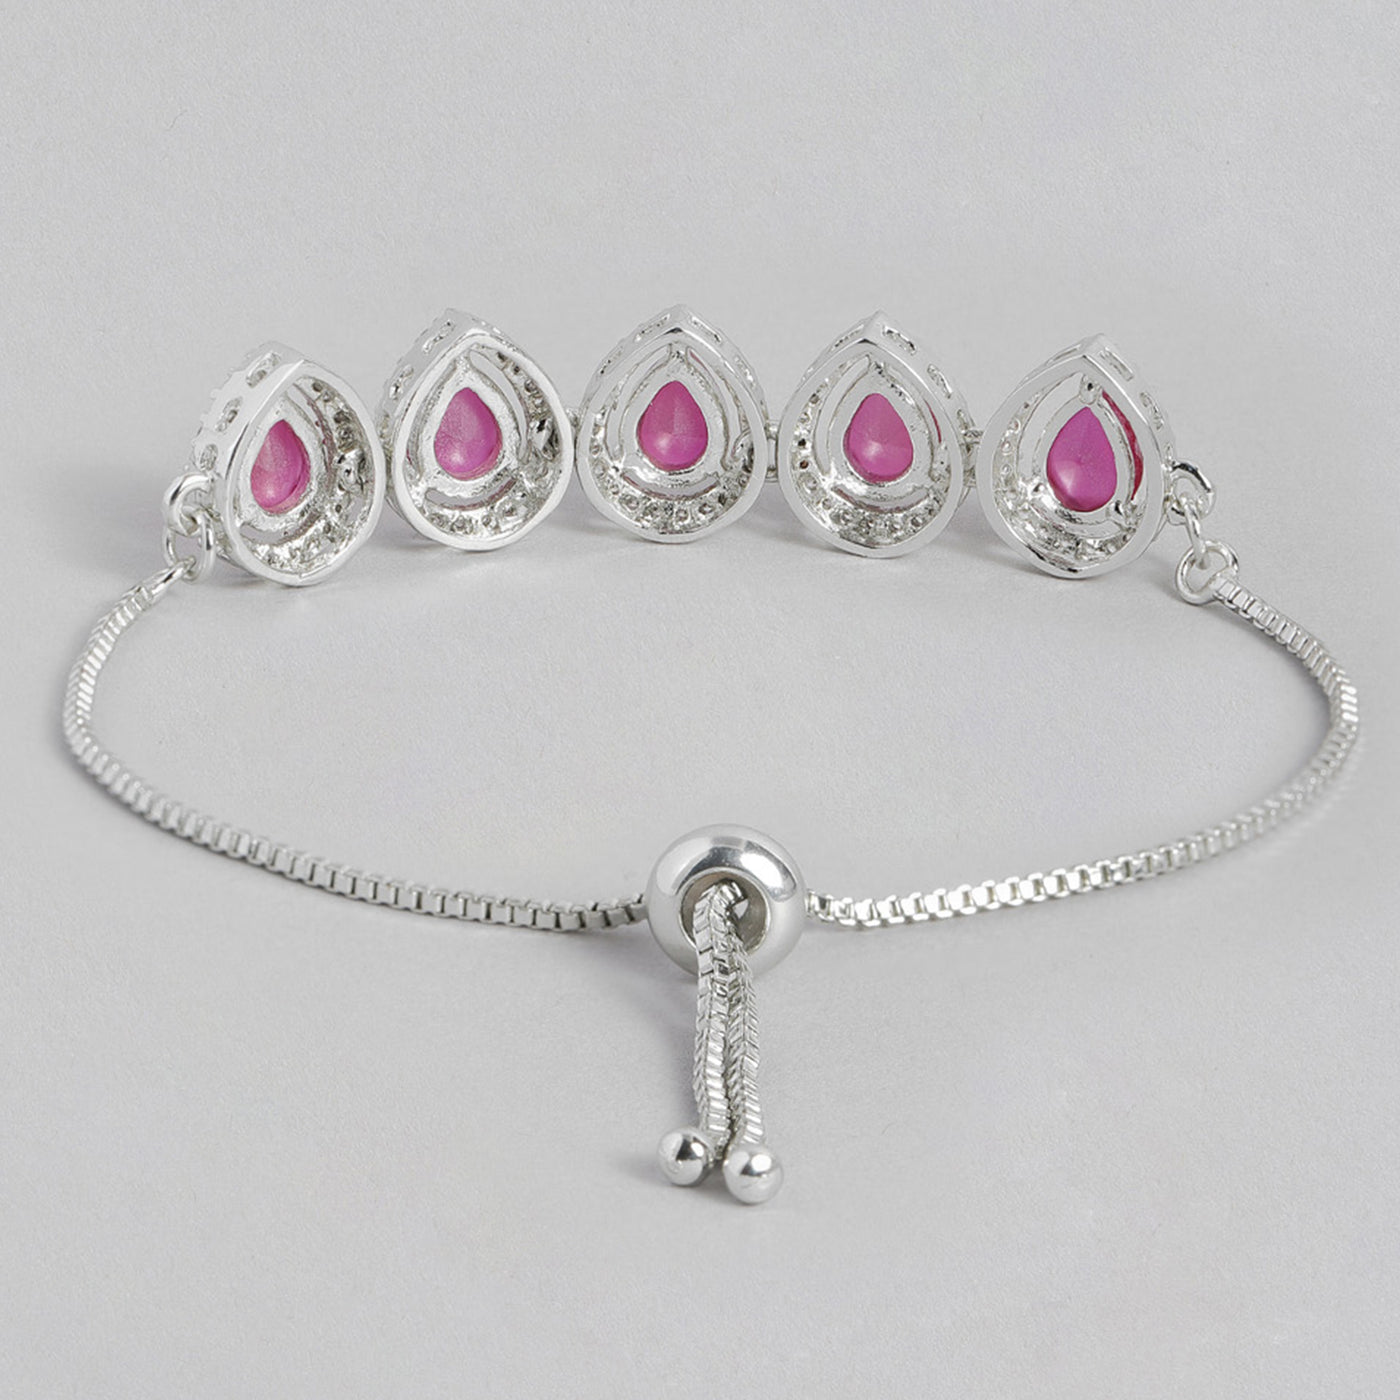 Estele Rhodium Plated CZ Precious Pears Bracelet with Ruby Crystals for Women